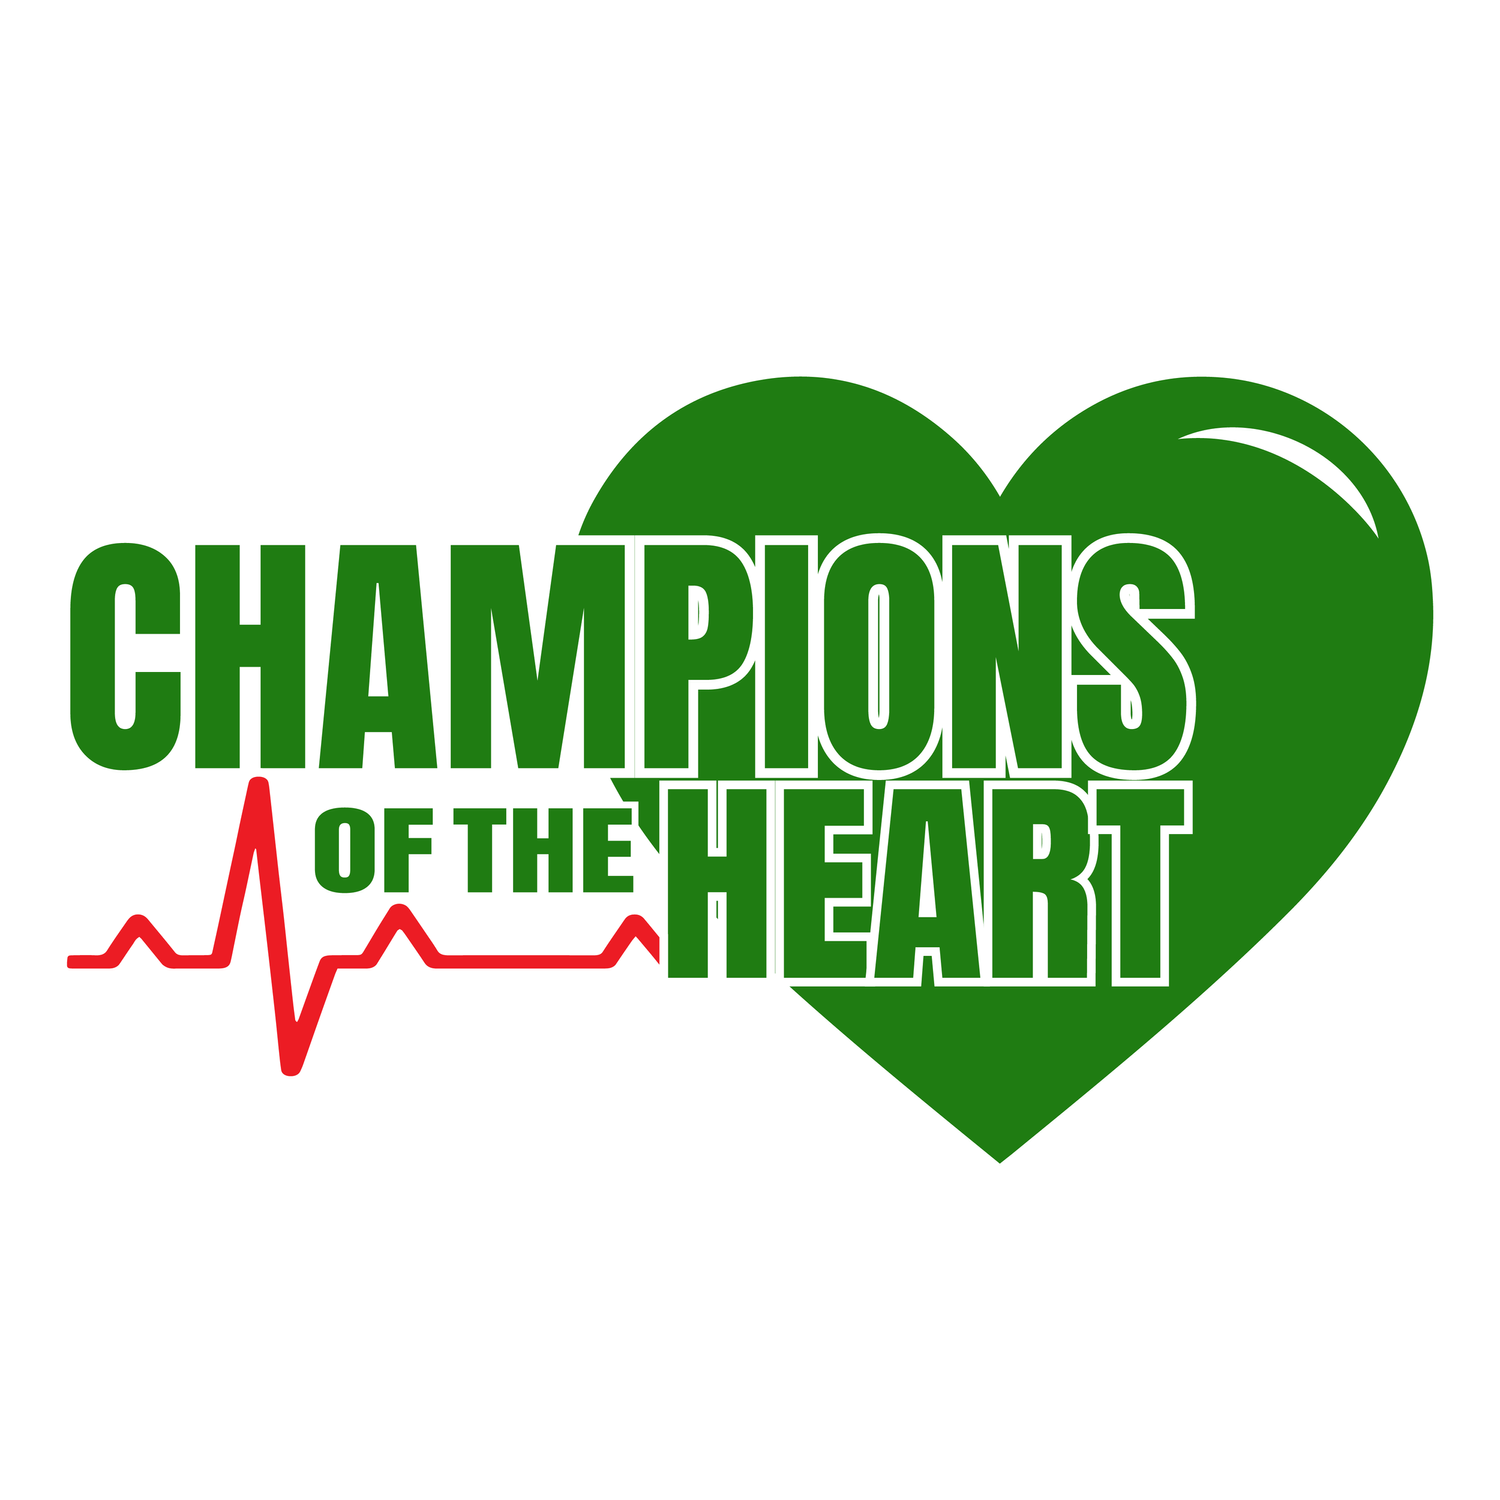 CHAMPIONS OF THE HEART